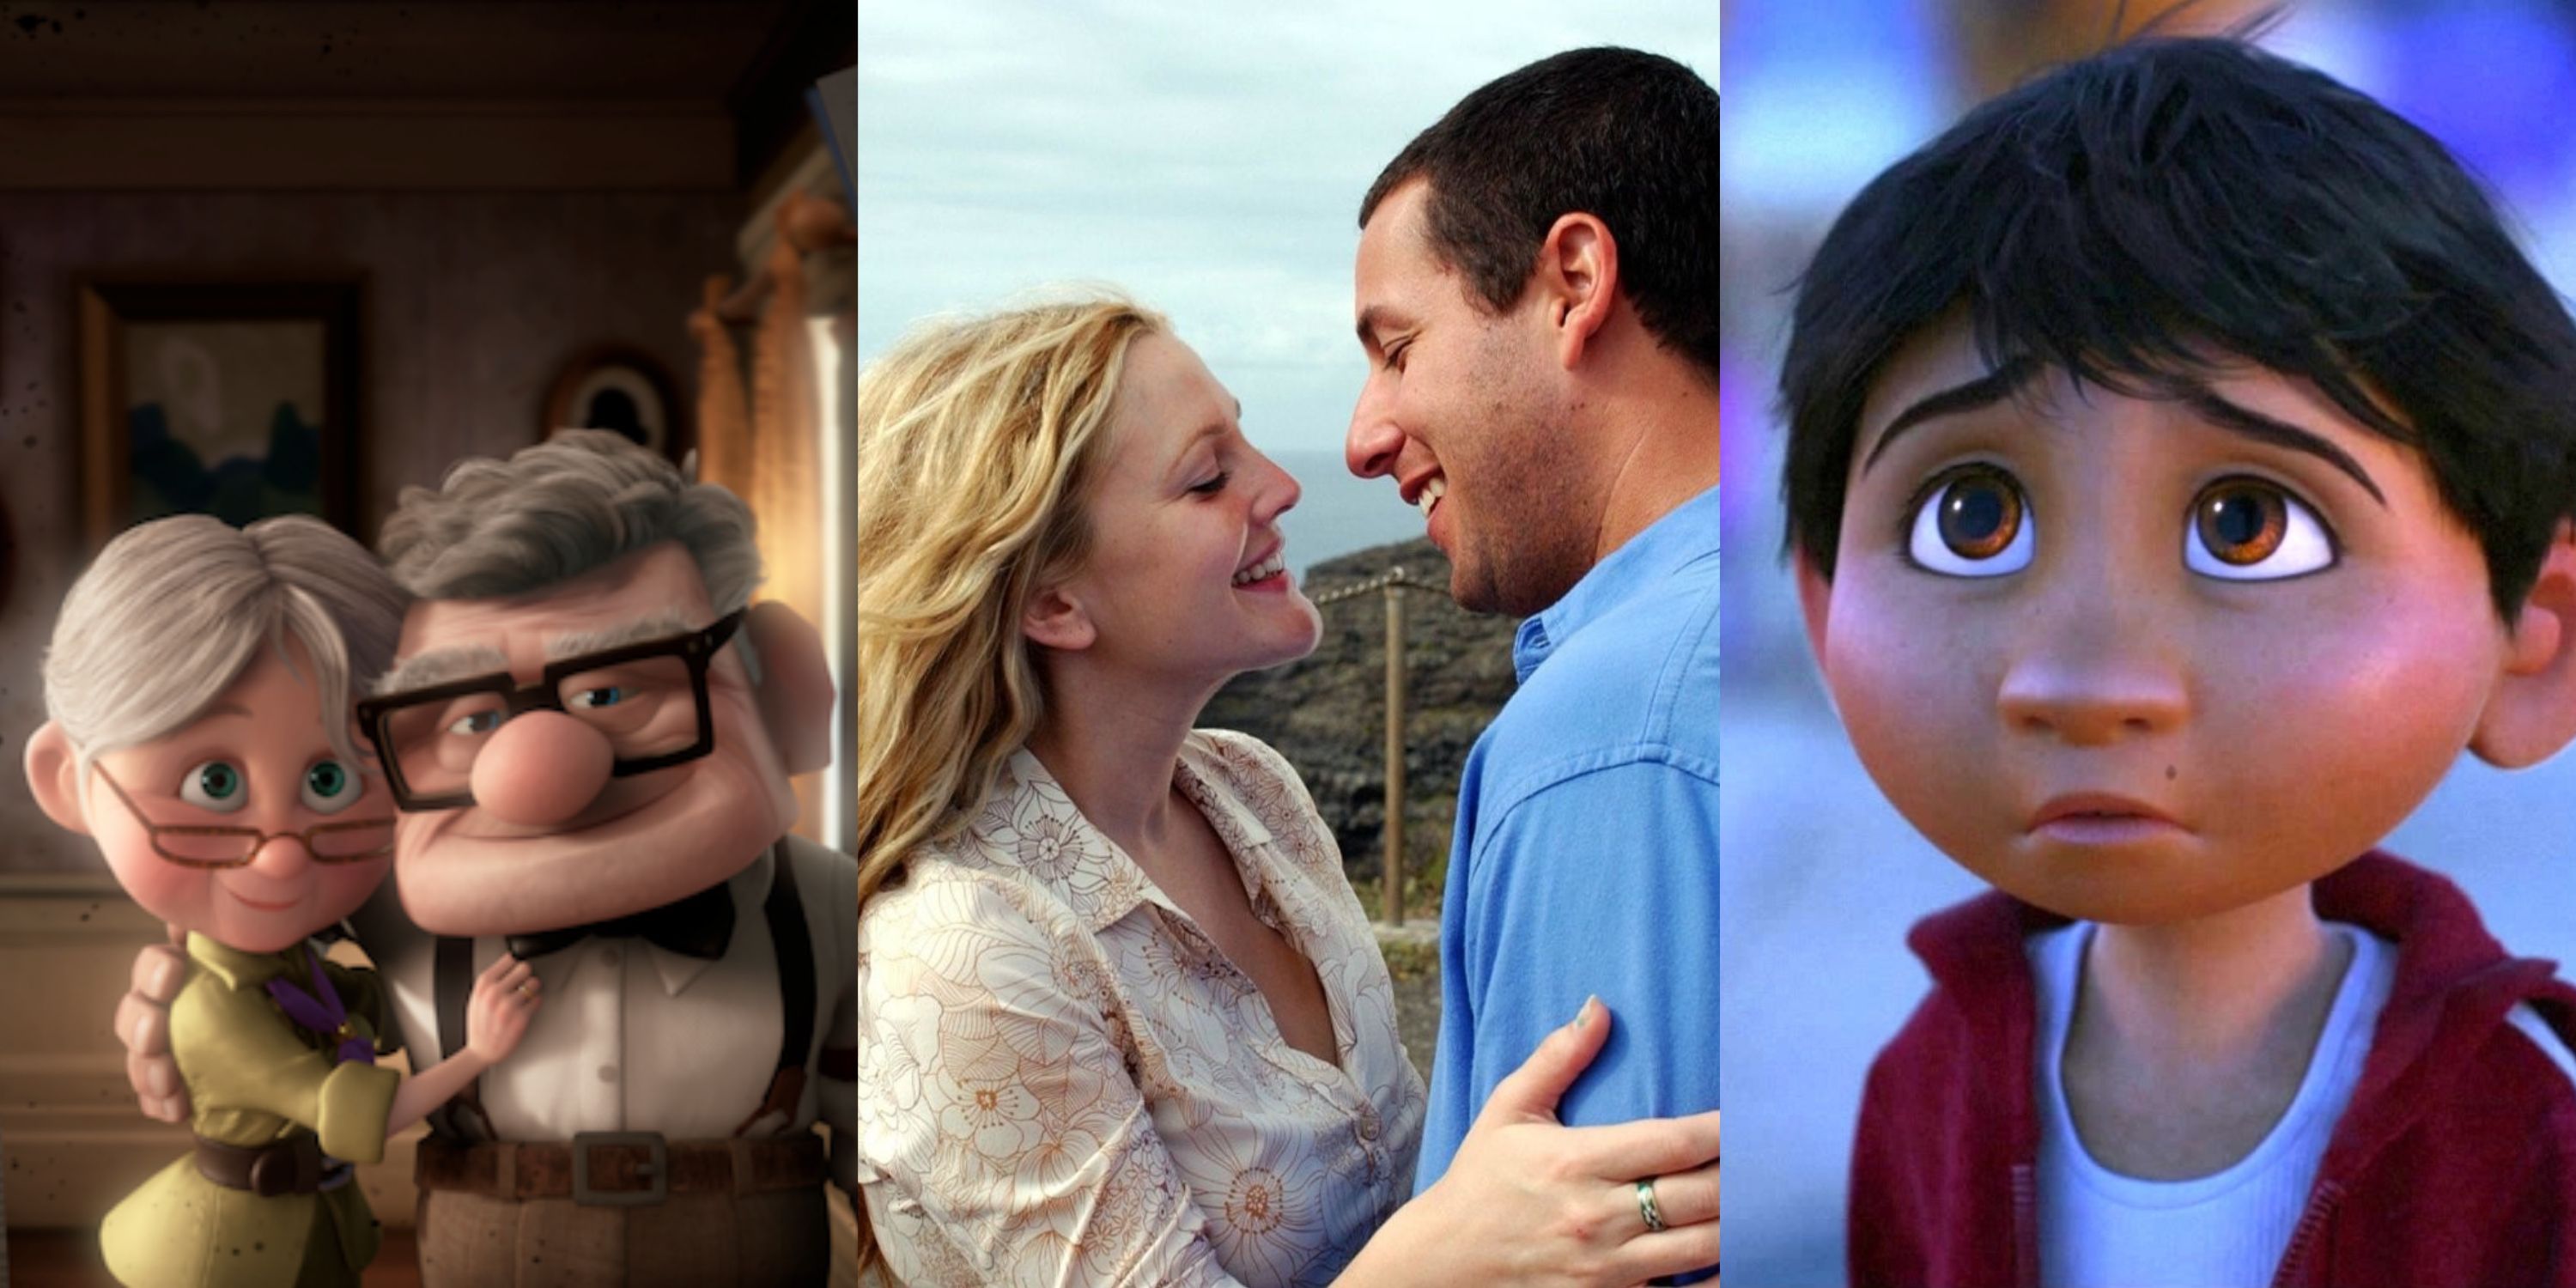 Split image of Ellie and Carl smiling while hugging, Henry and Lucy smiling at each other, and Miguel looking up sadly